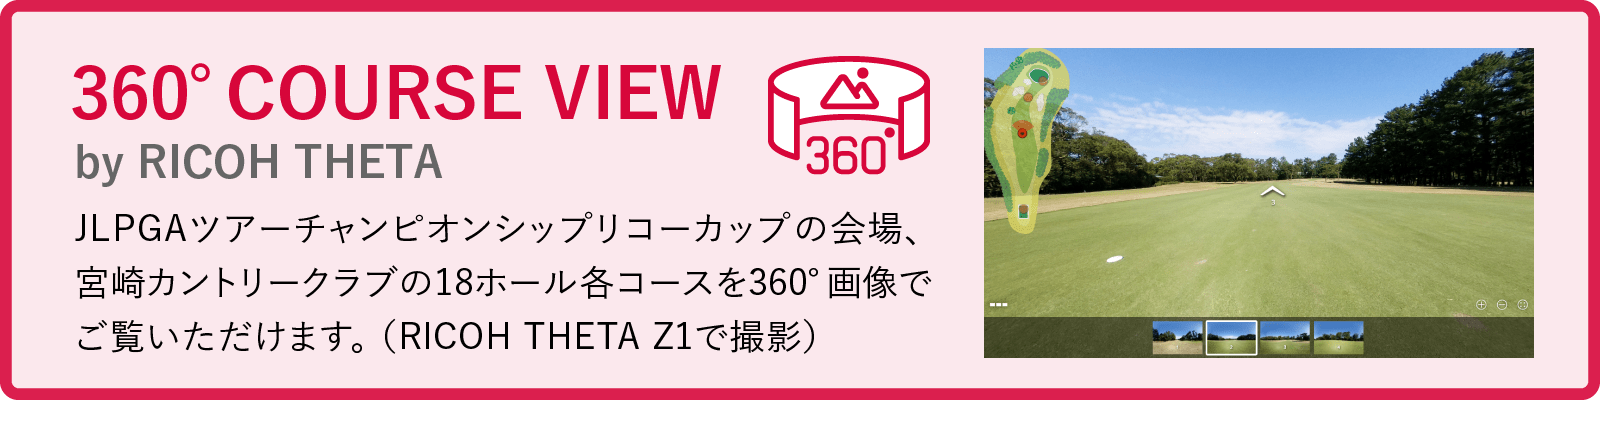 360°COURSE VIEW